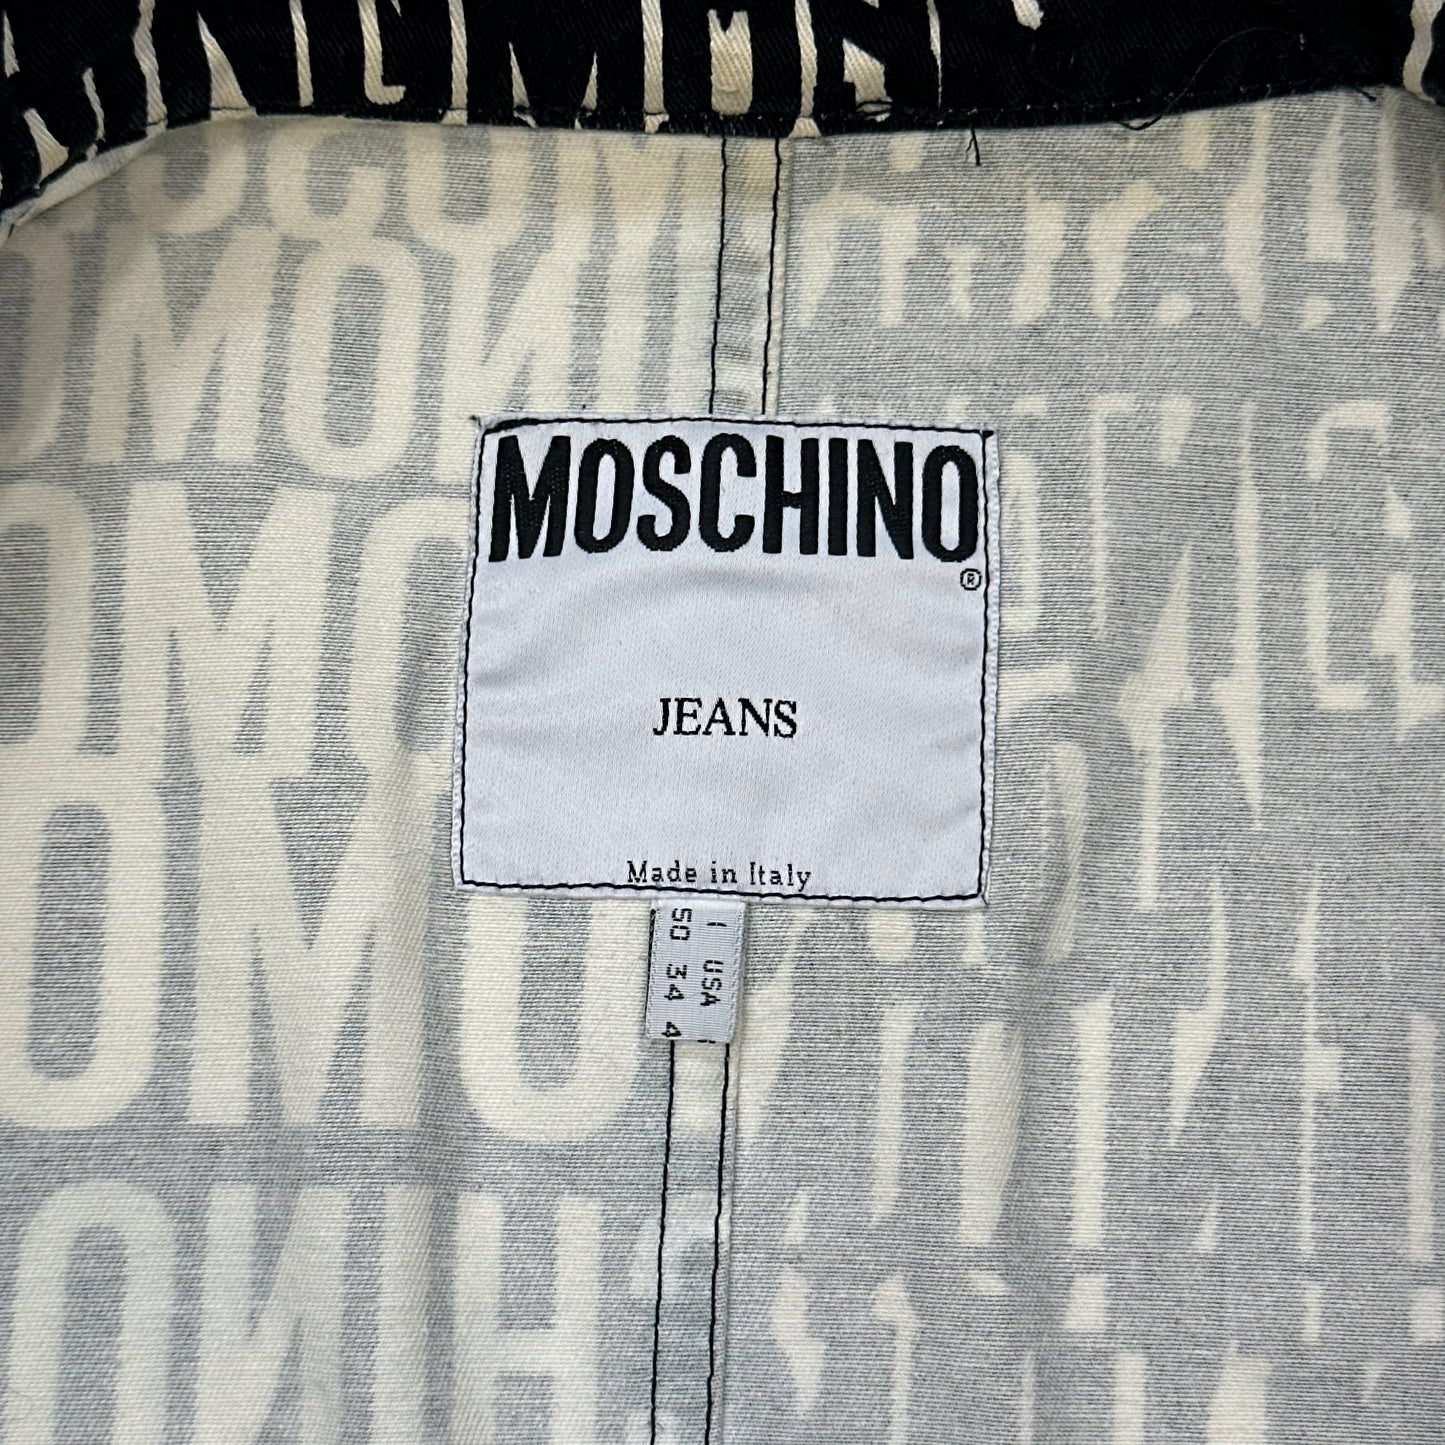 Moschino Jeans 1996 Crazy Jacket - IT50 (M)